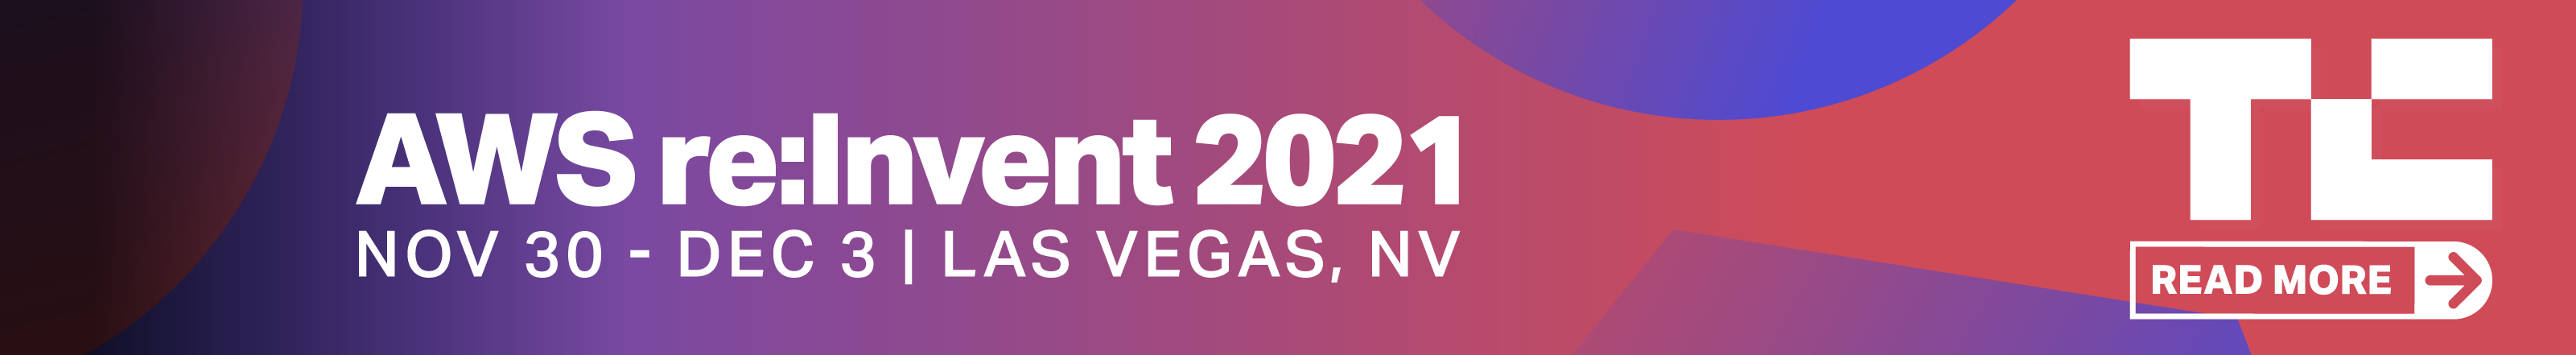 read more about AWS re:Invent 2021 on NH2N